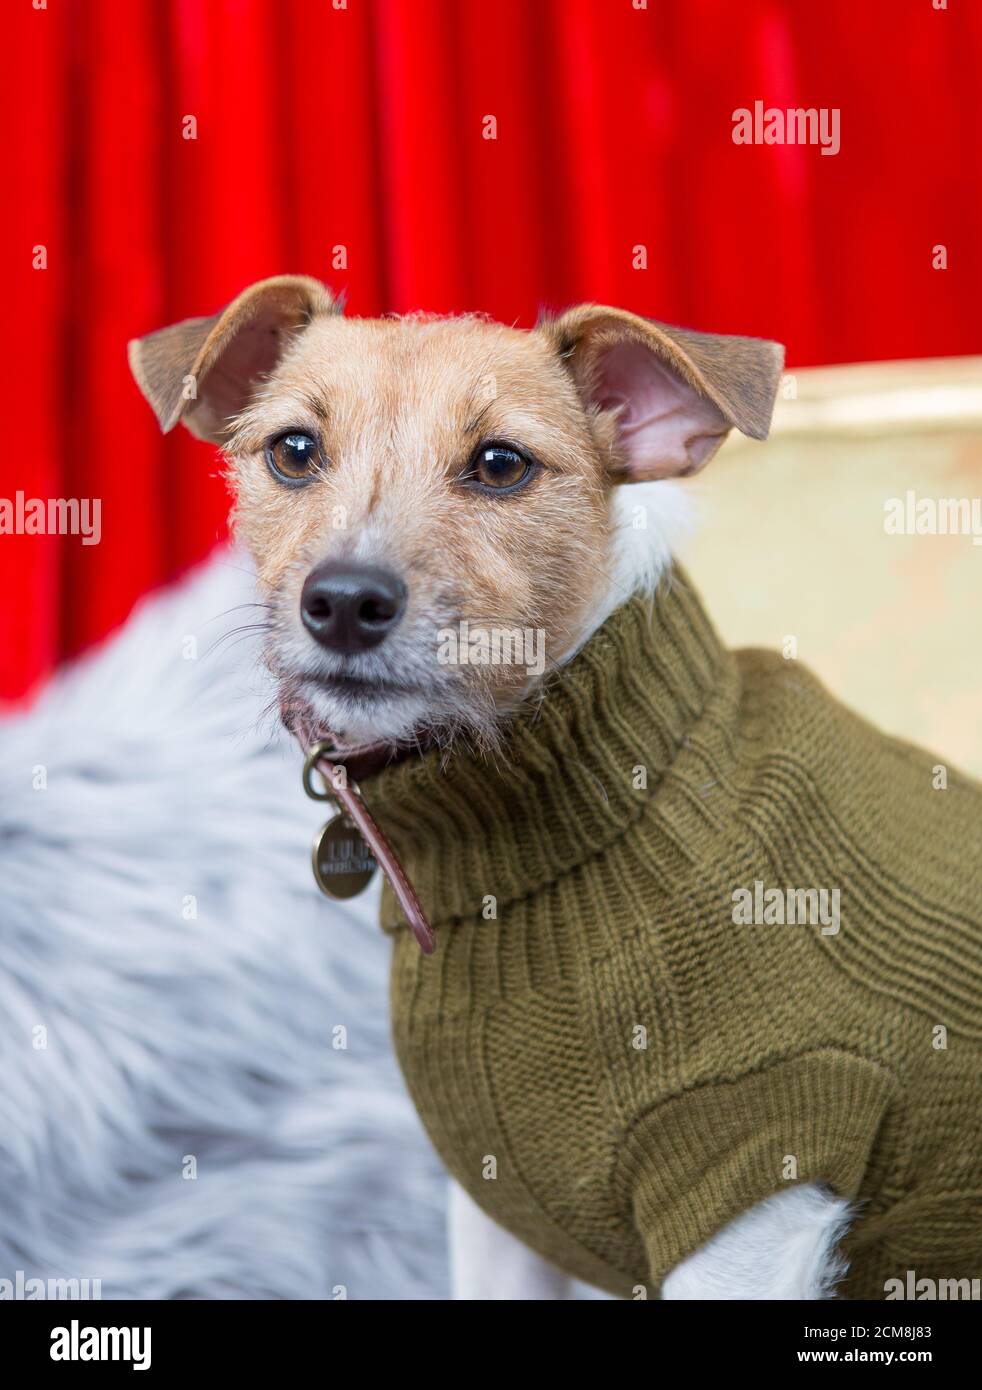 Jack Russell Terrier wearing winter clothing Stock Photo - Alamy